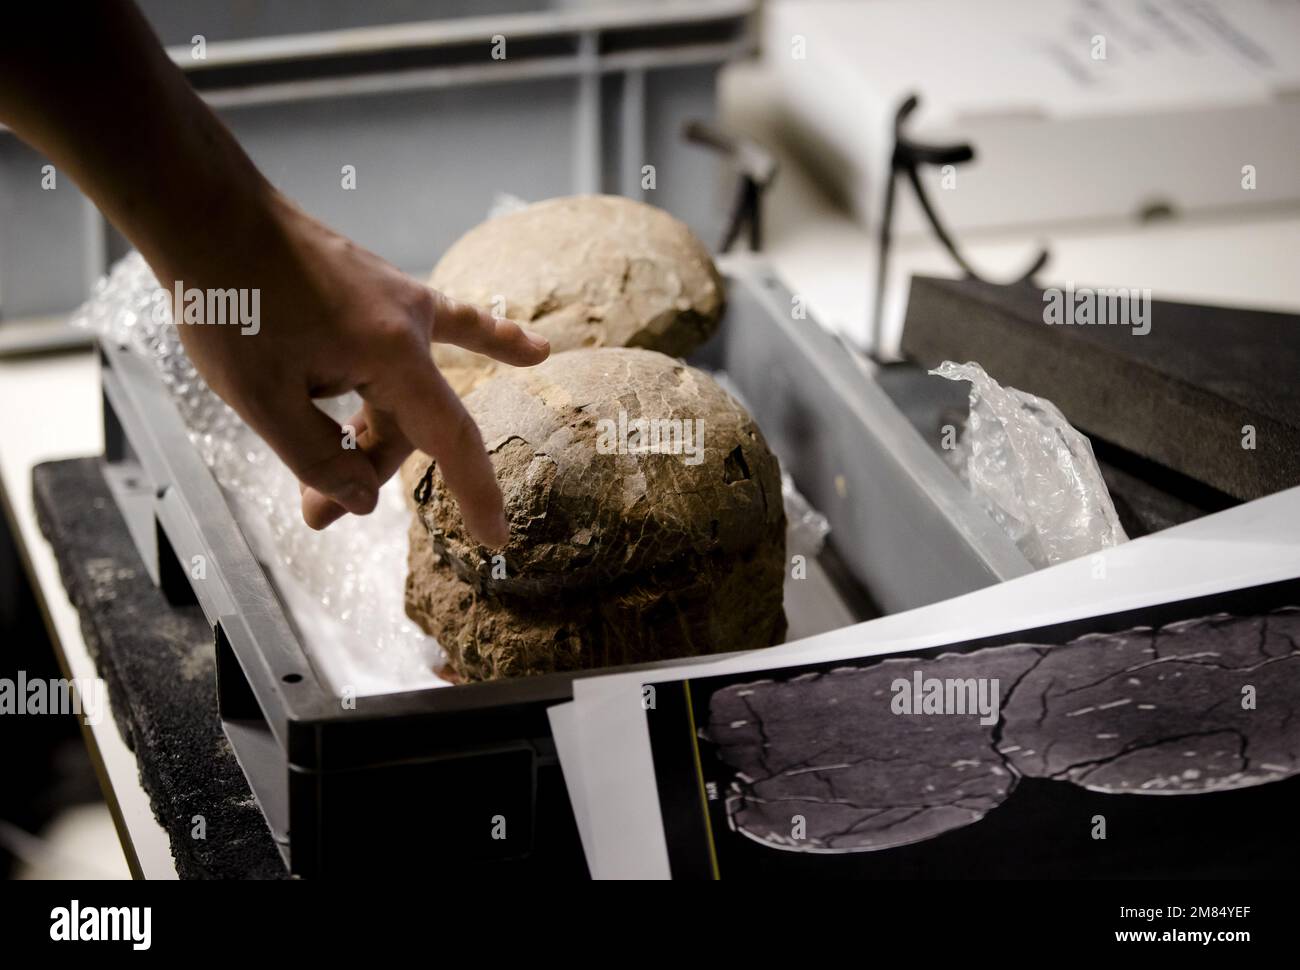 BOXTEL - Two dinosaur eggs in the Oertijdmuseum. The museum had 33 dinosaur eggs scanned at the Jeroen Bosch hospital in Den Bosch. The museum is looking for dinosaur embryos in the eggs. ANP SEM VAN DER WAL netherlands out - belgium out Stock Photo